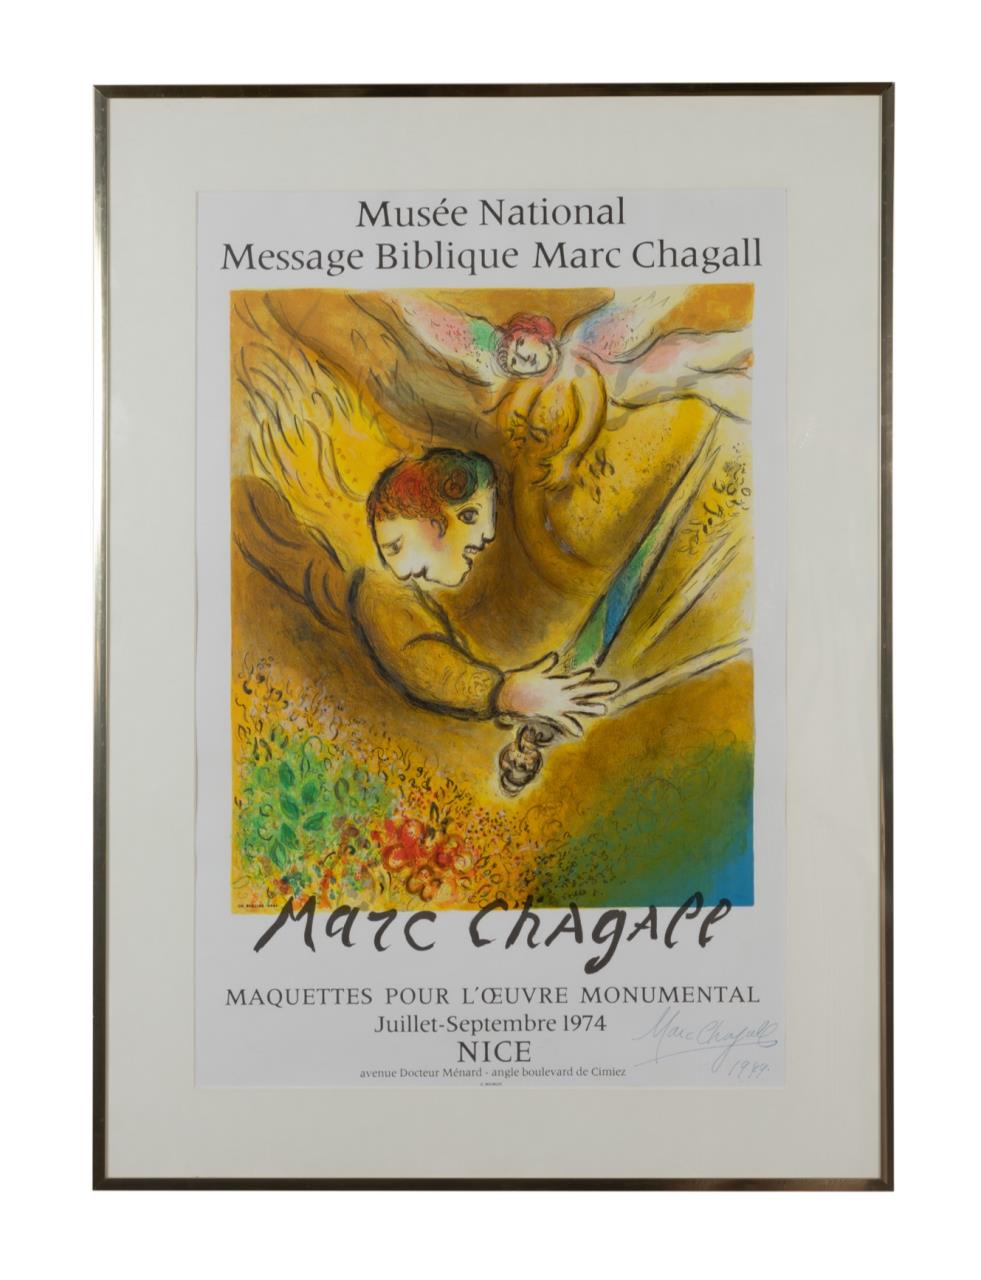 AFTER MARC CHAGALL MUSEE NATIONAL 354de6